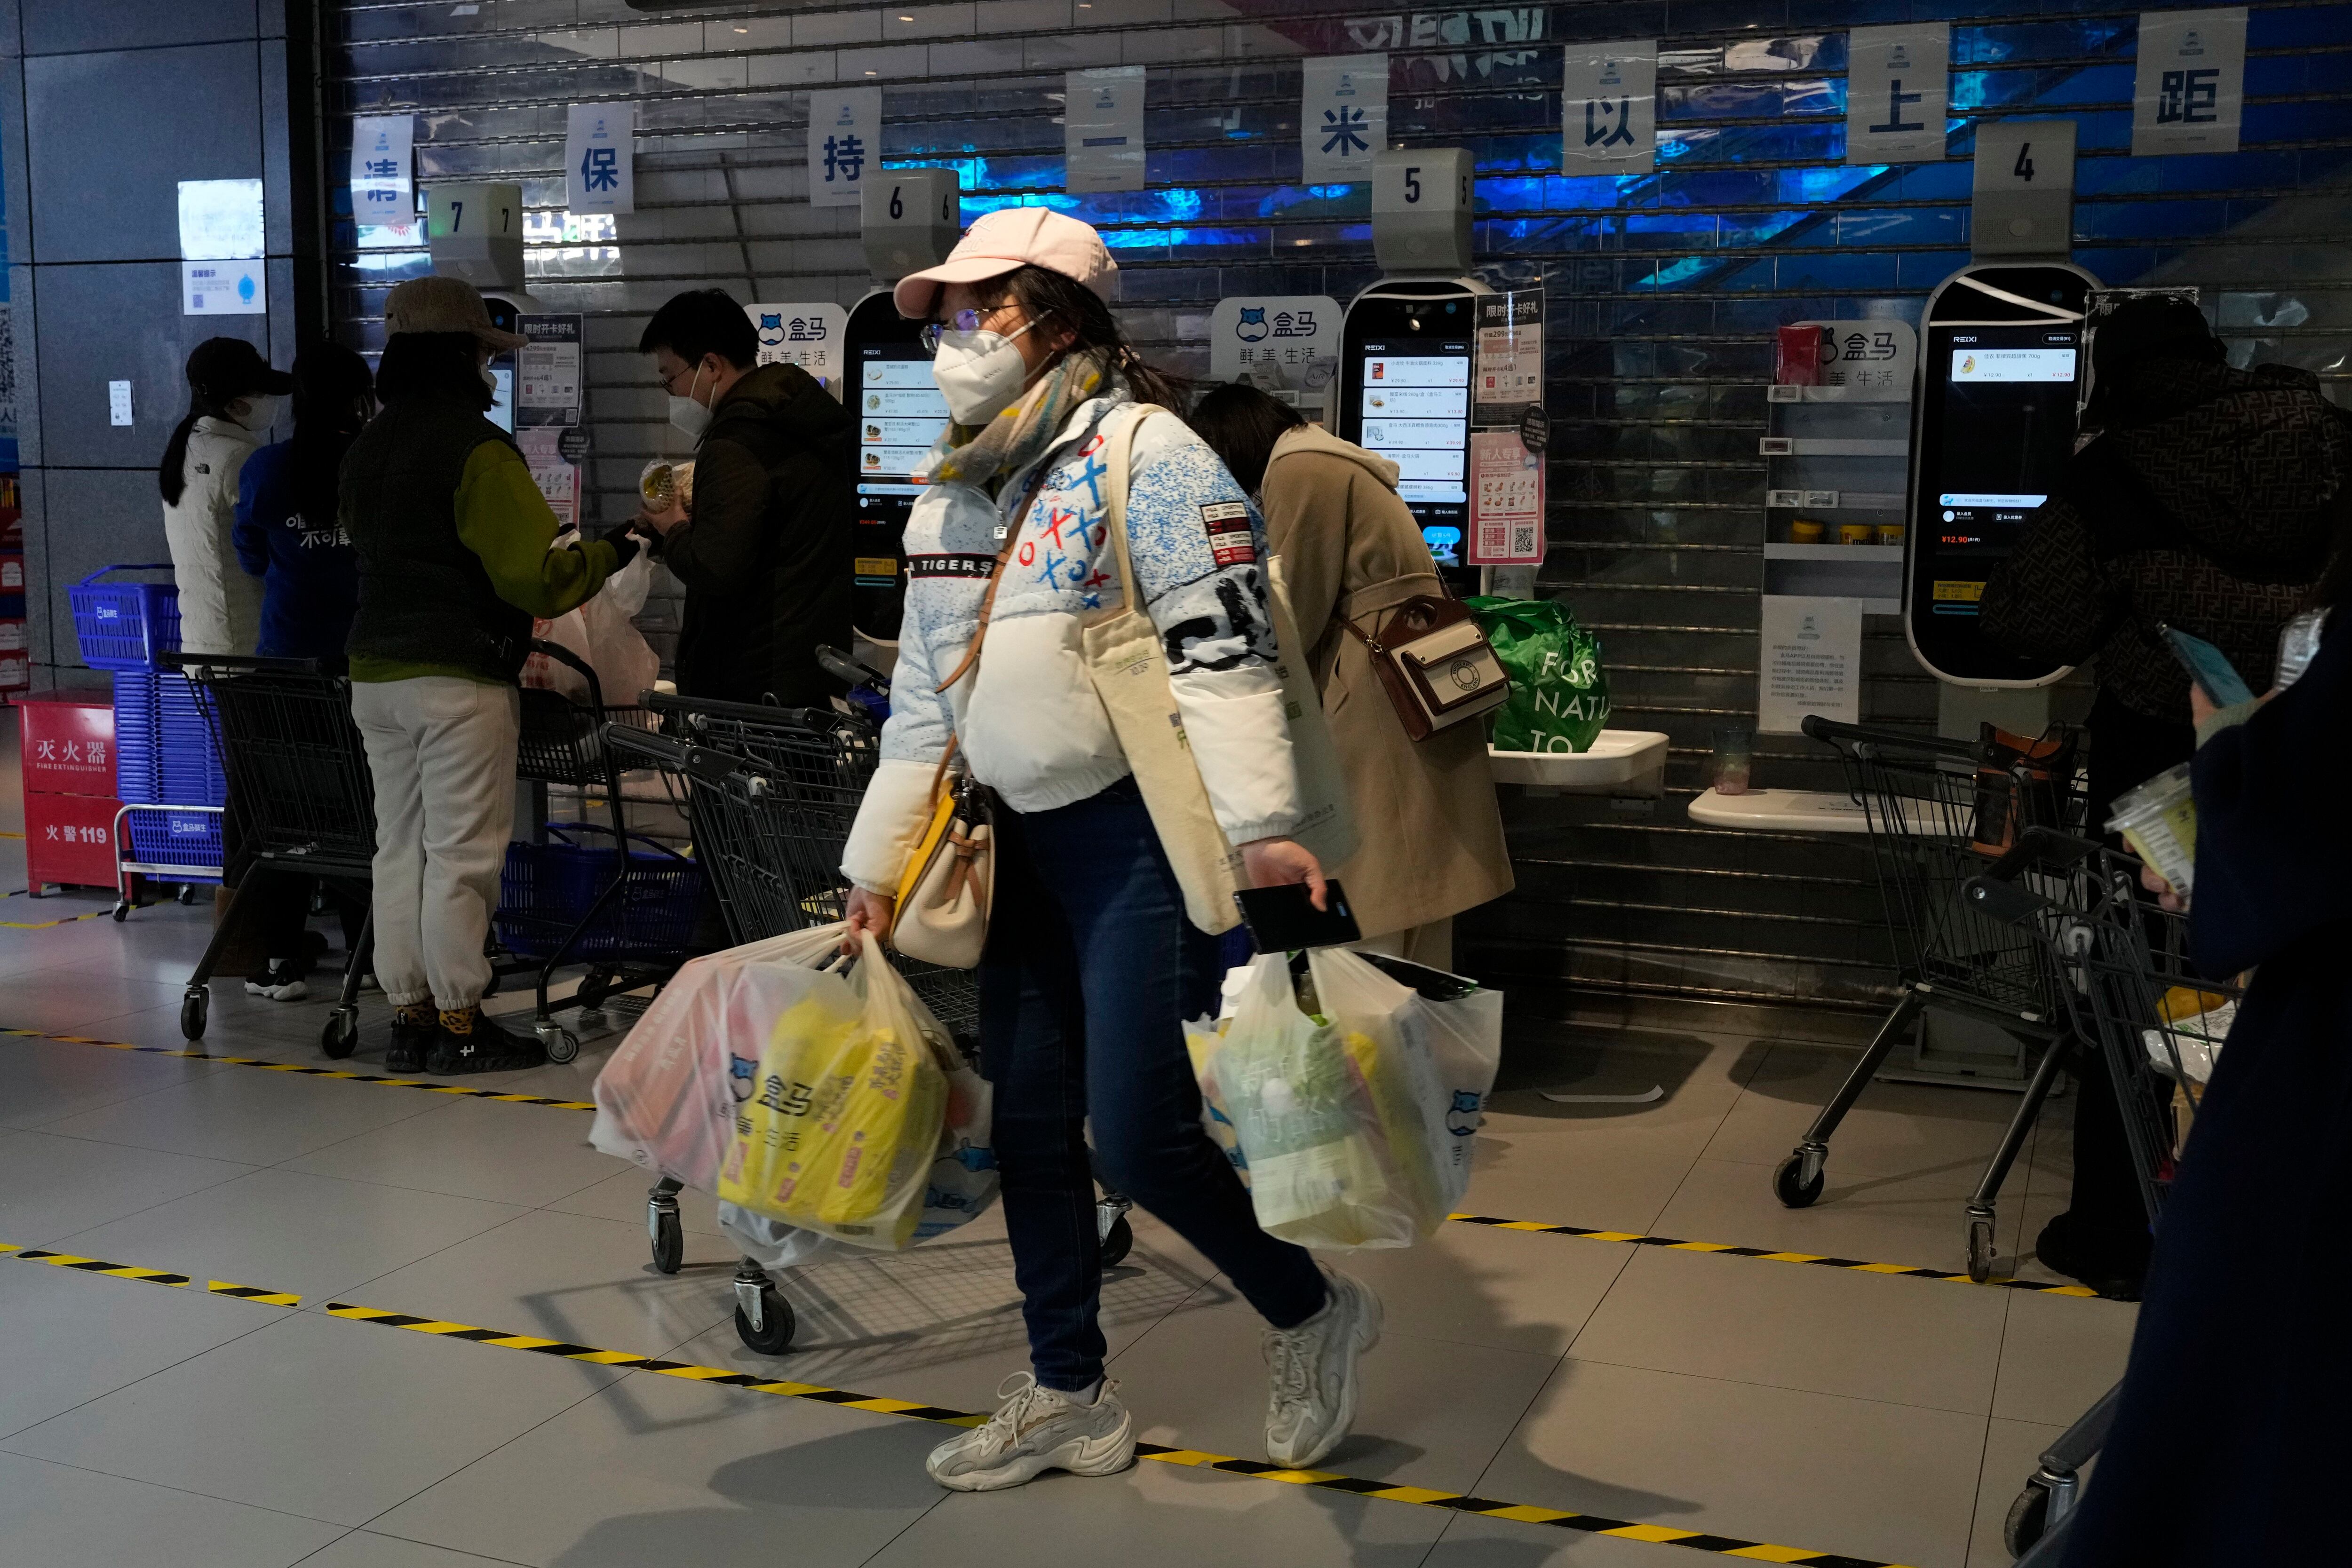 Panic-buying in Beijing as city adds new quarantine centers